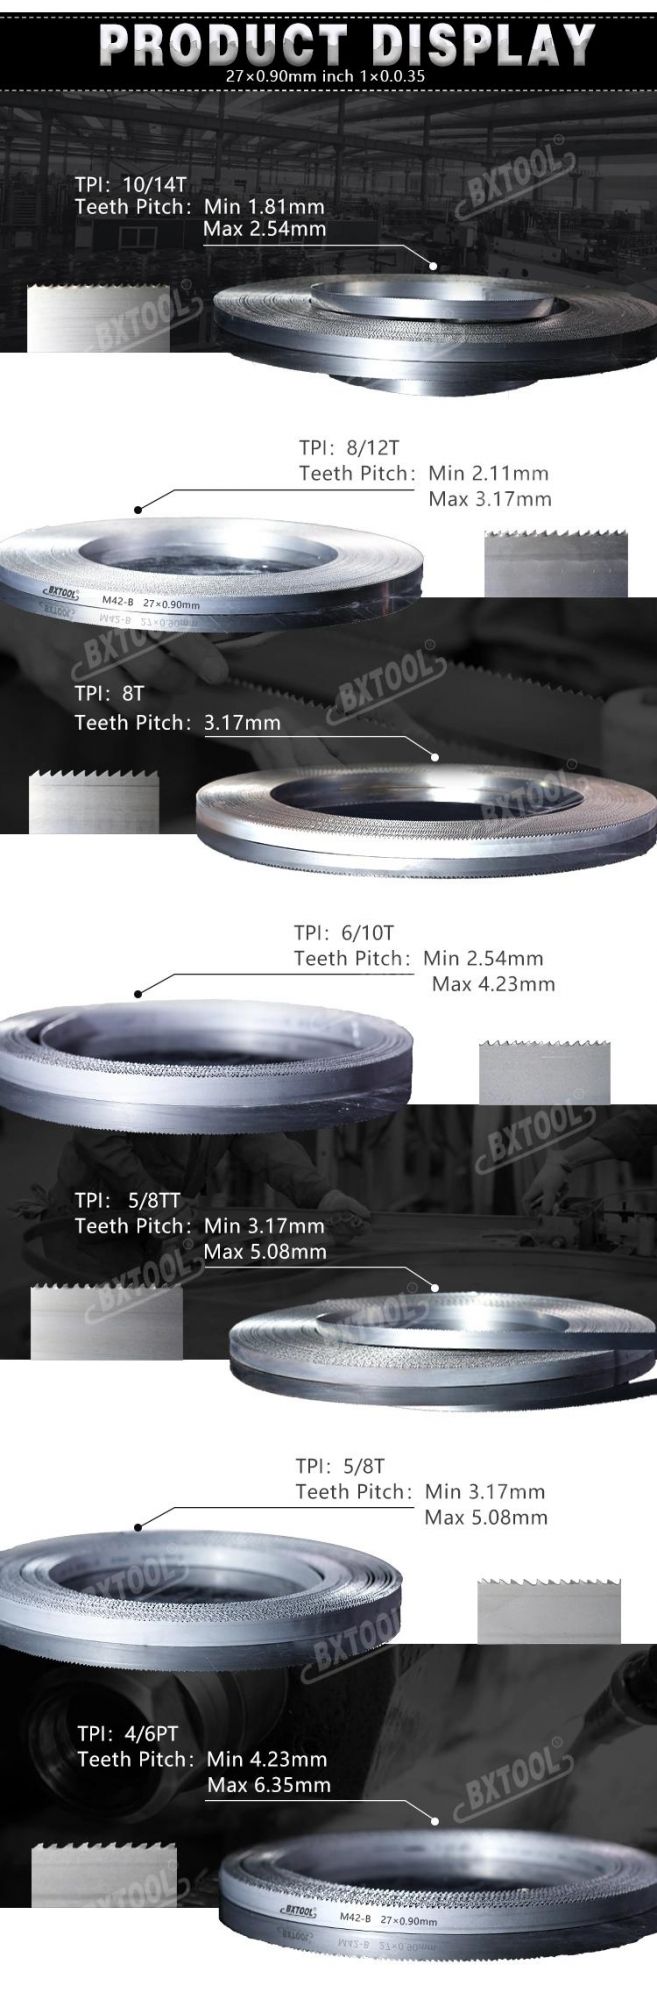 HSS Bimetal Band Saw Blades The Machine Used Made in China Band Saw Blades Manufacturers